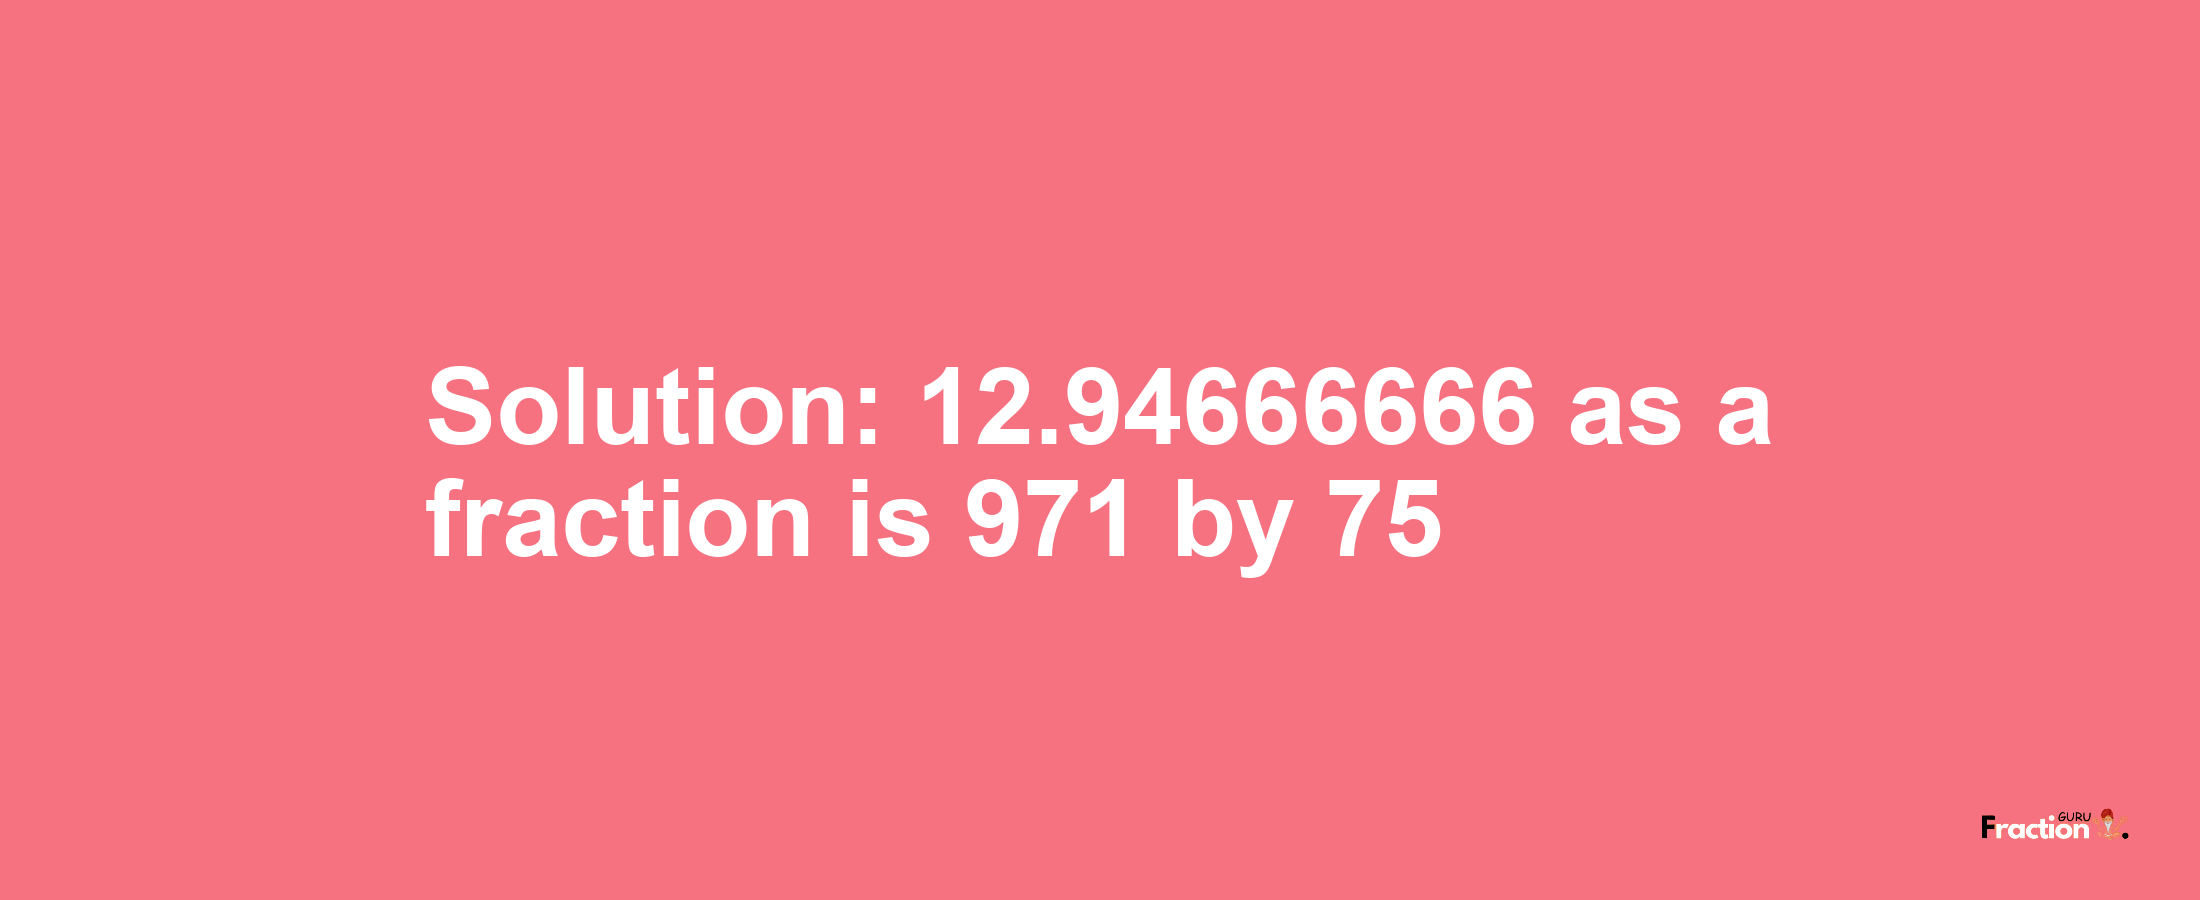 Solution:12.94666666 as a fraction is 971/75